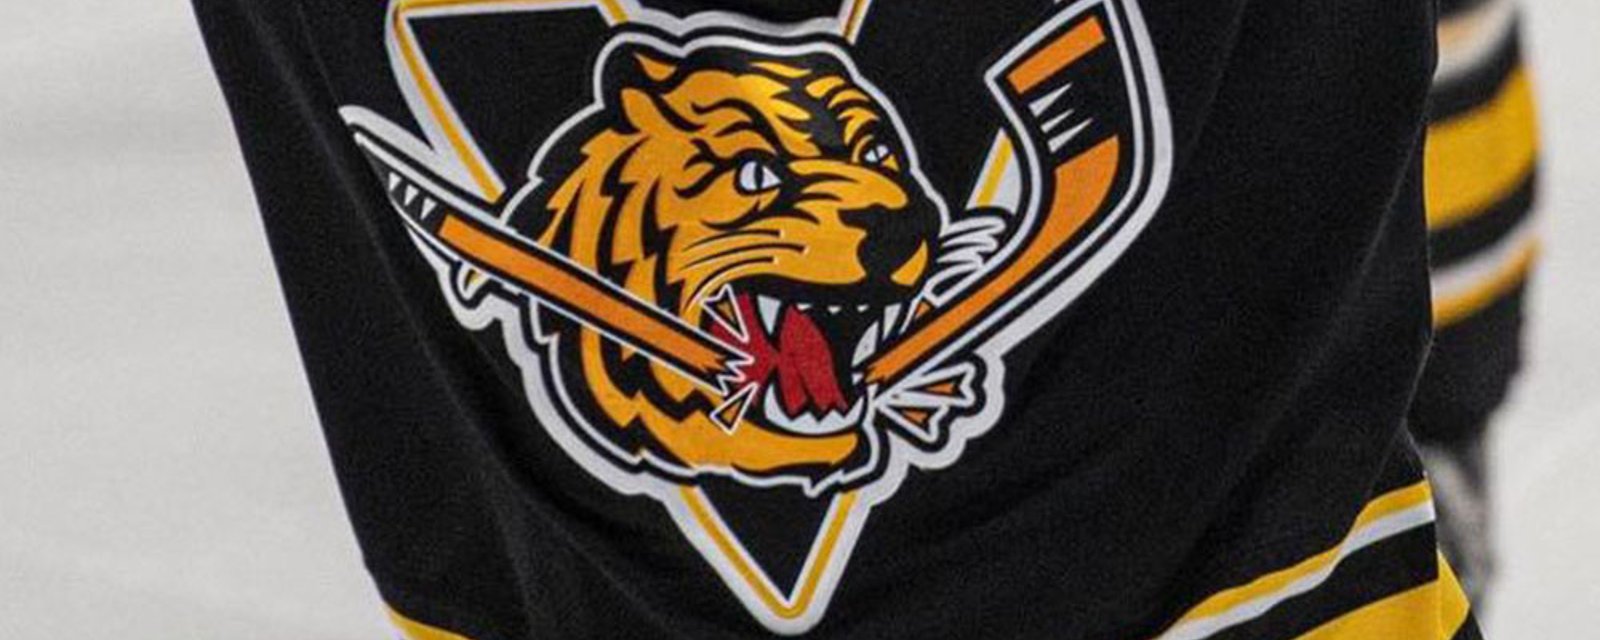 QMJHL players Daigle and Siciliano charged with sexual assault of a minor